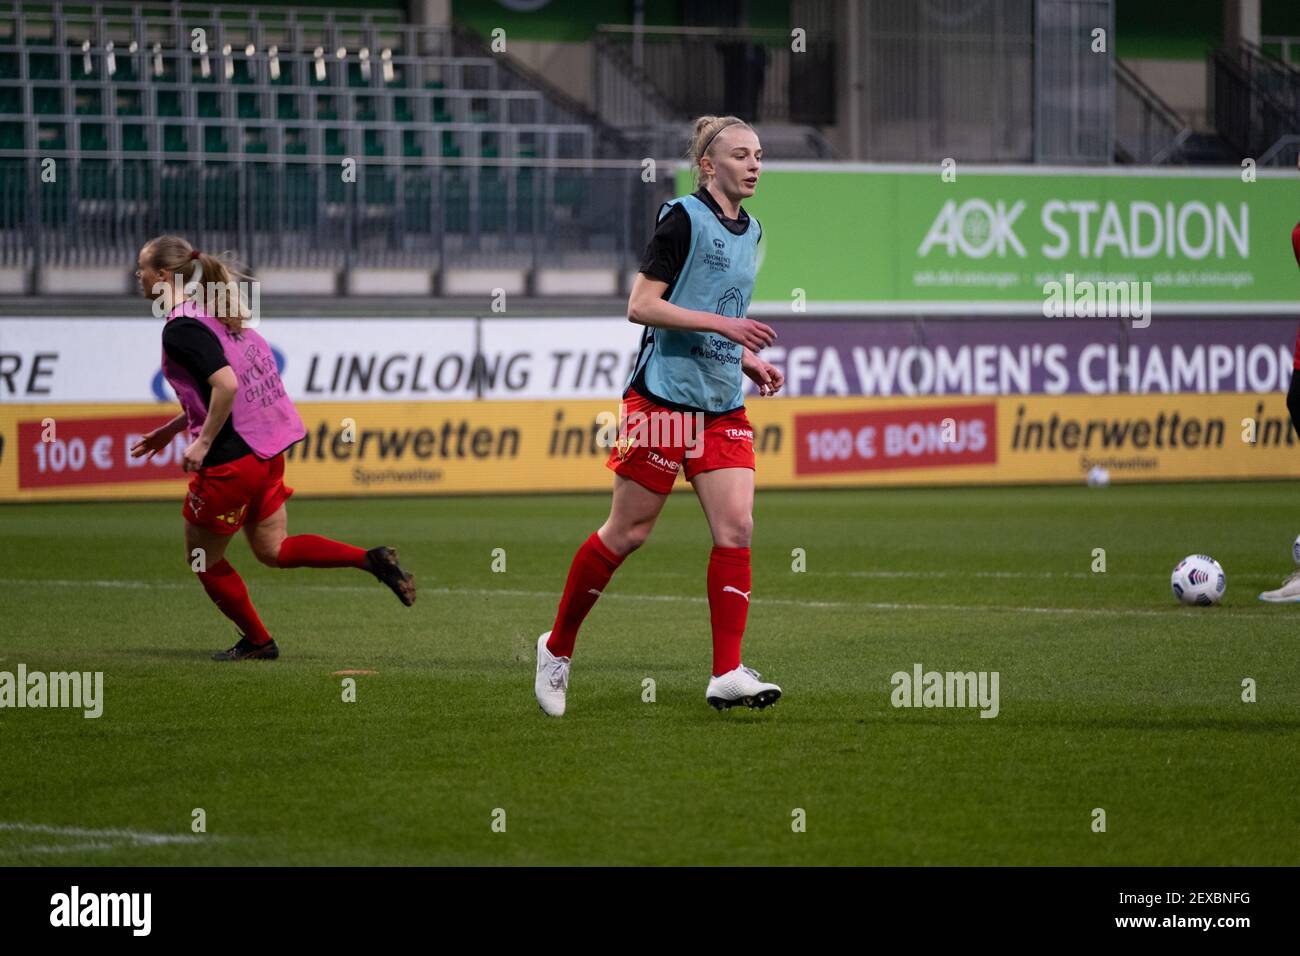 Ina Gausdal (#5 LSK Kvinner) during warm up before the match in the Uefa Women's Champions League round of 16 between VfL Wolfsburg and LSK Kvinner at AOK Stadion in Wolfsburg Stock Photo